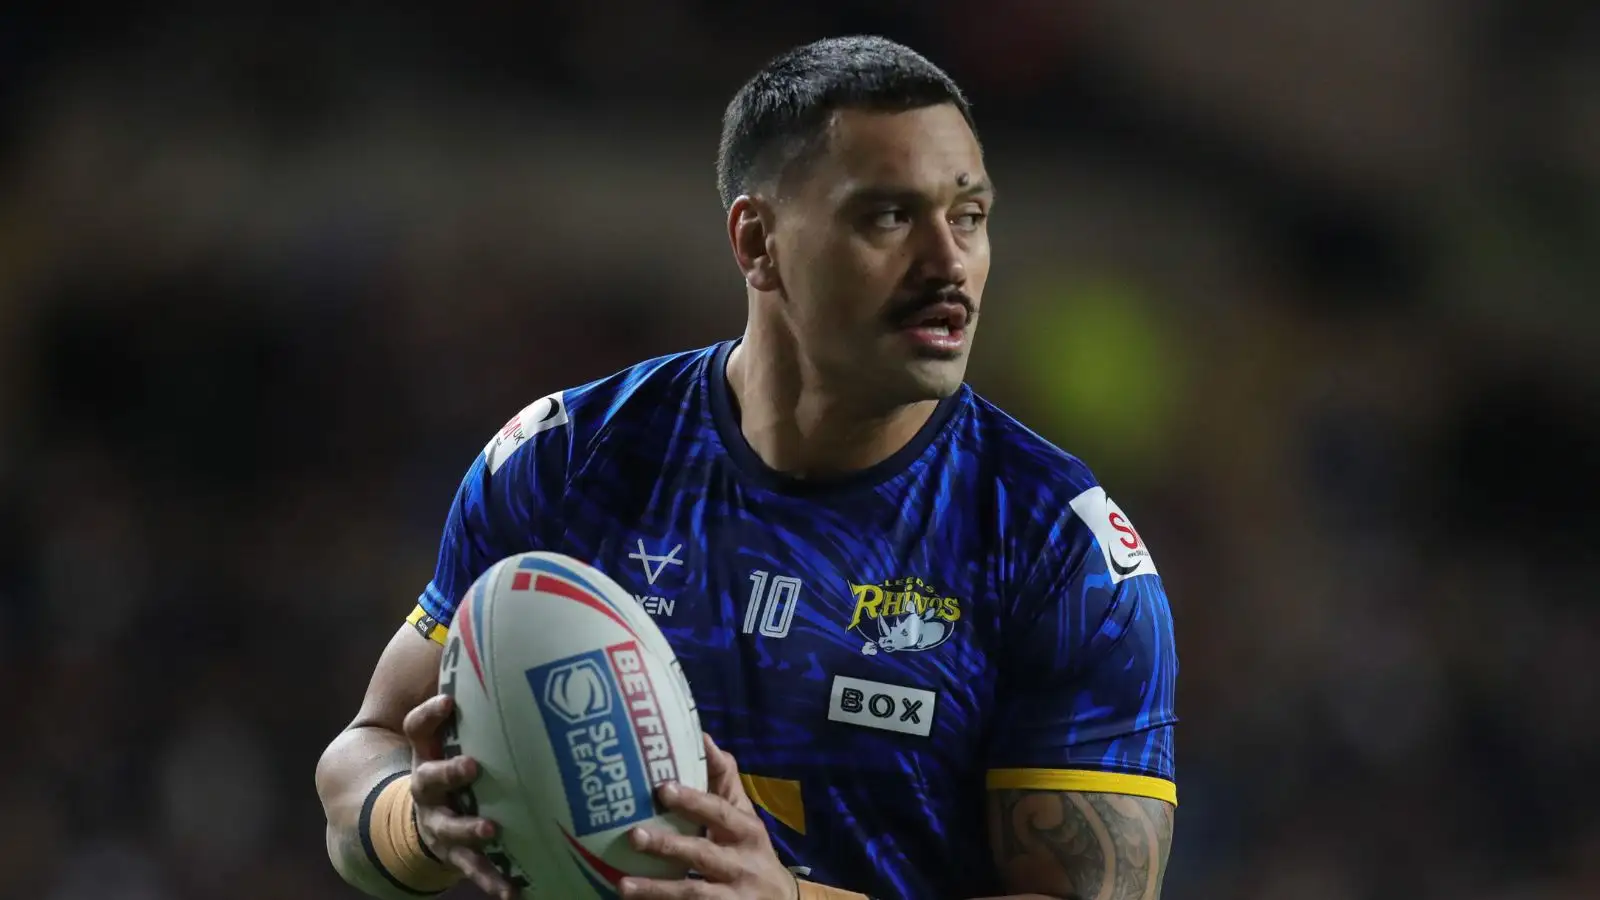 NRL return confirmed for ex-Leeds Rhinos forward Zane Tetevano after recovery from heart surgery